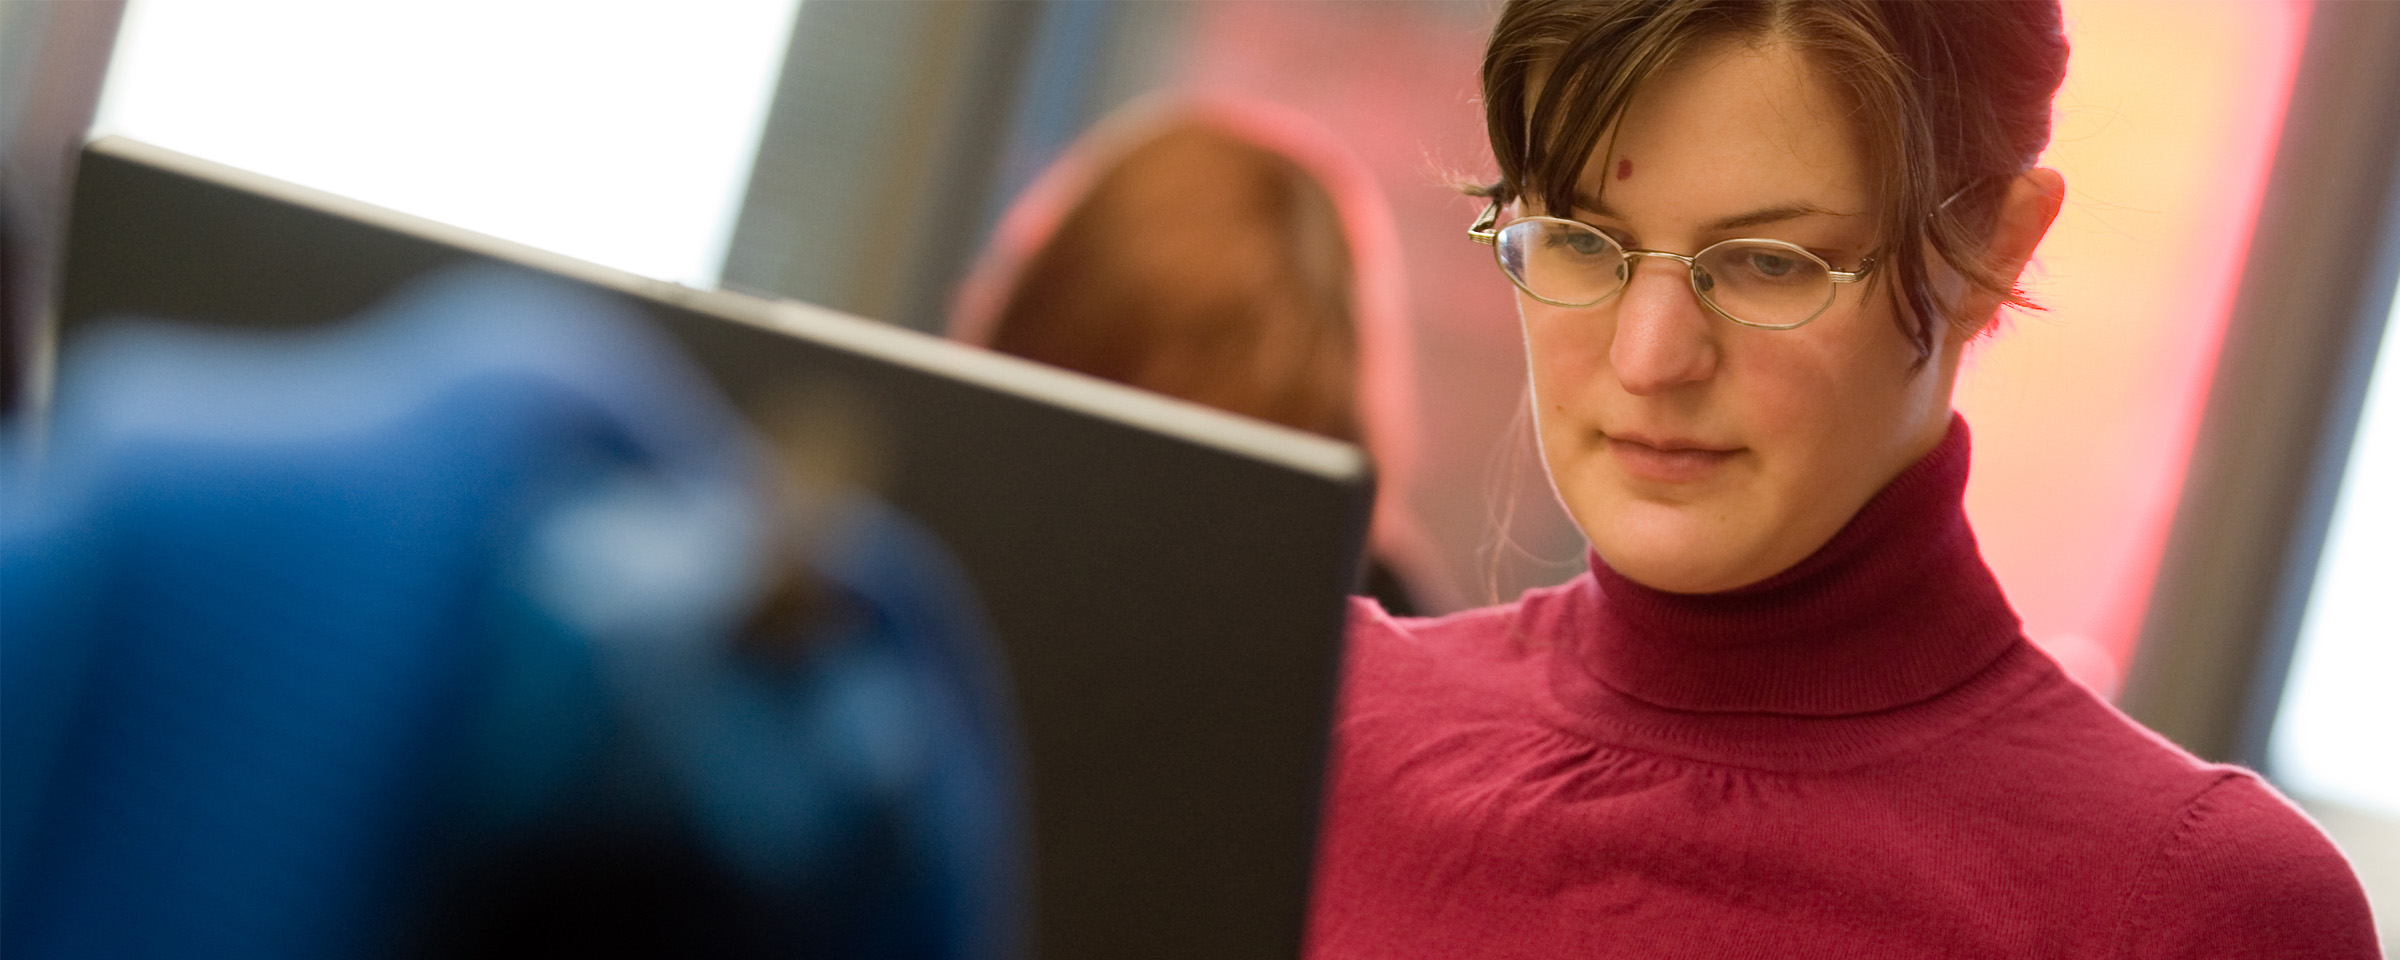 Woman with glasses working on computer